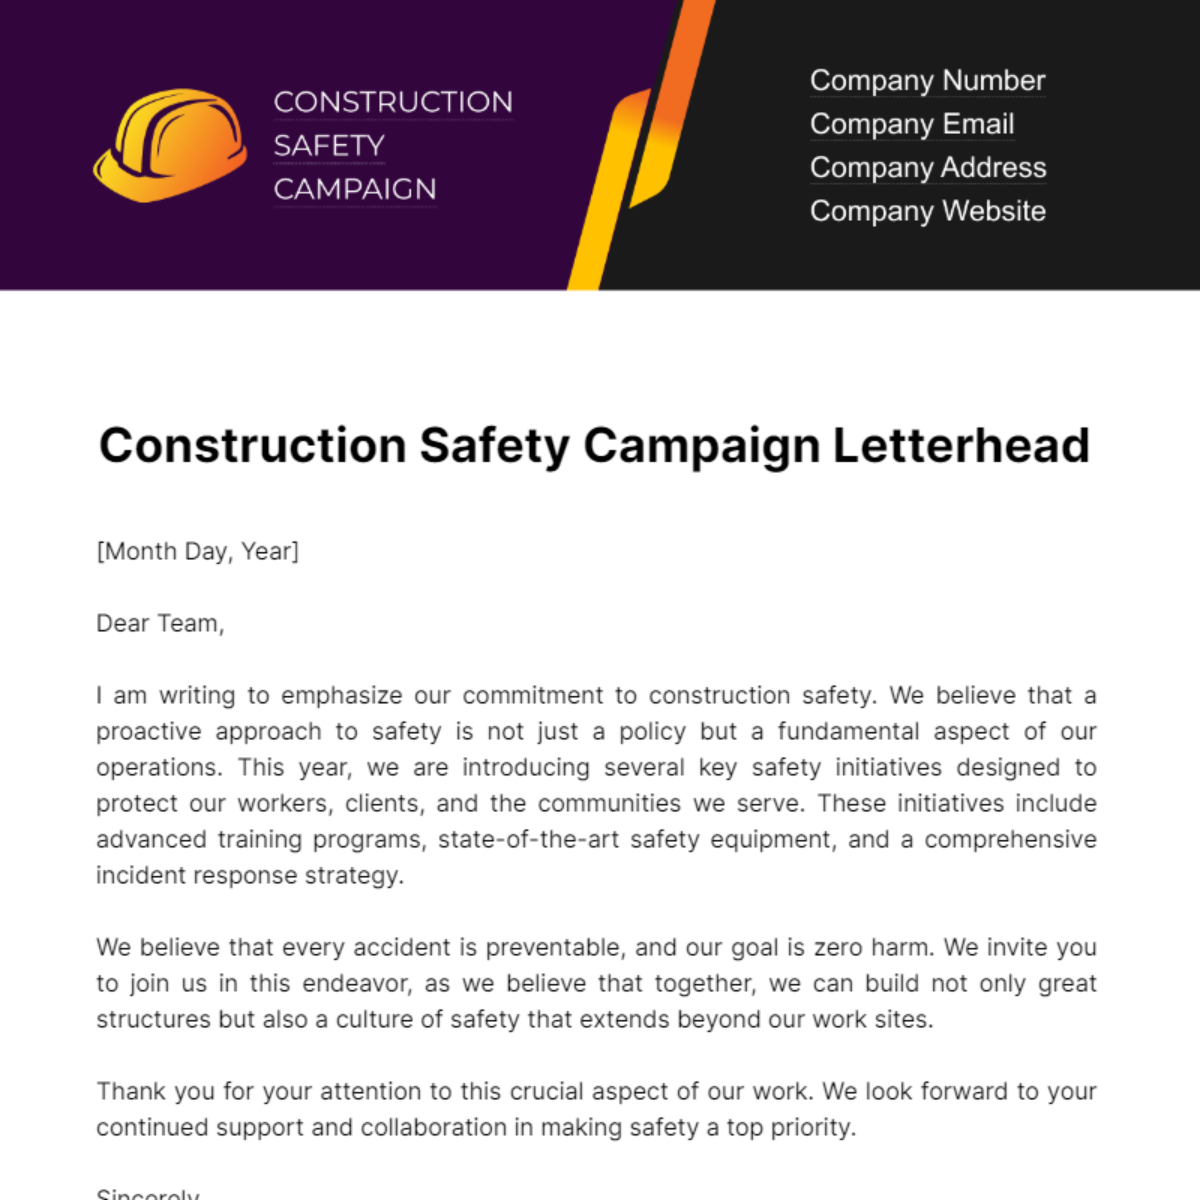 Construction Safety Campaign Letterhead Template